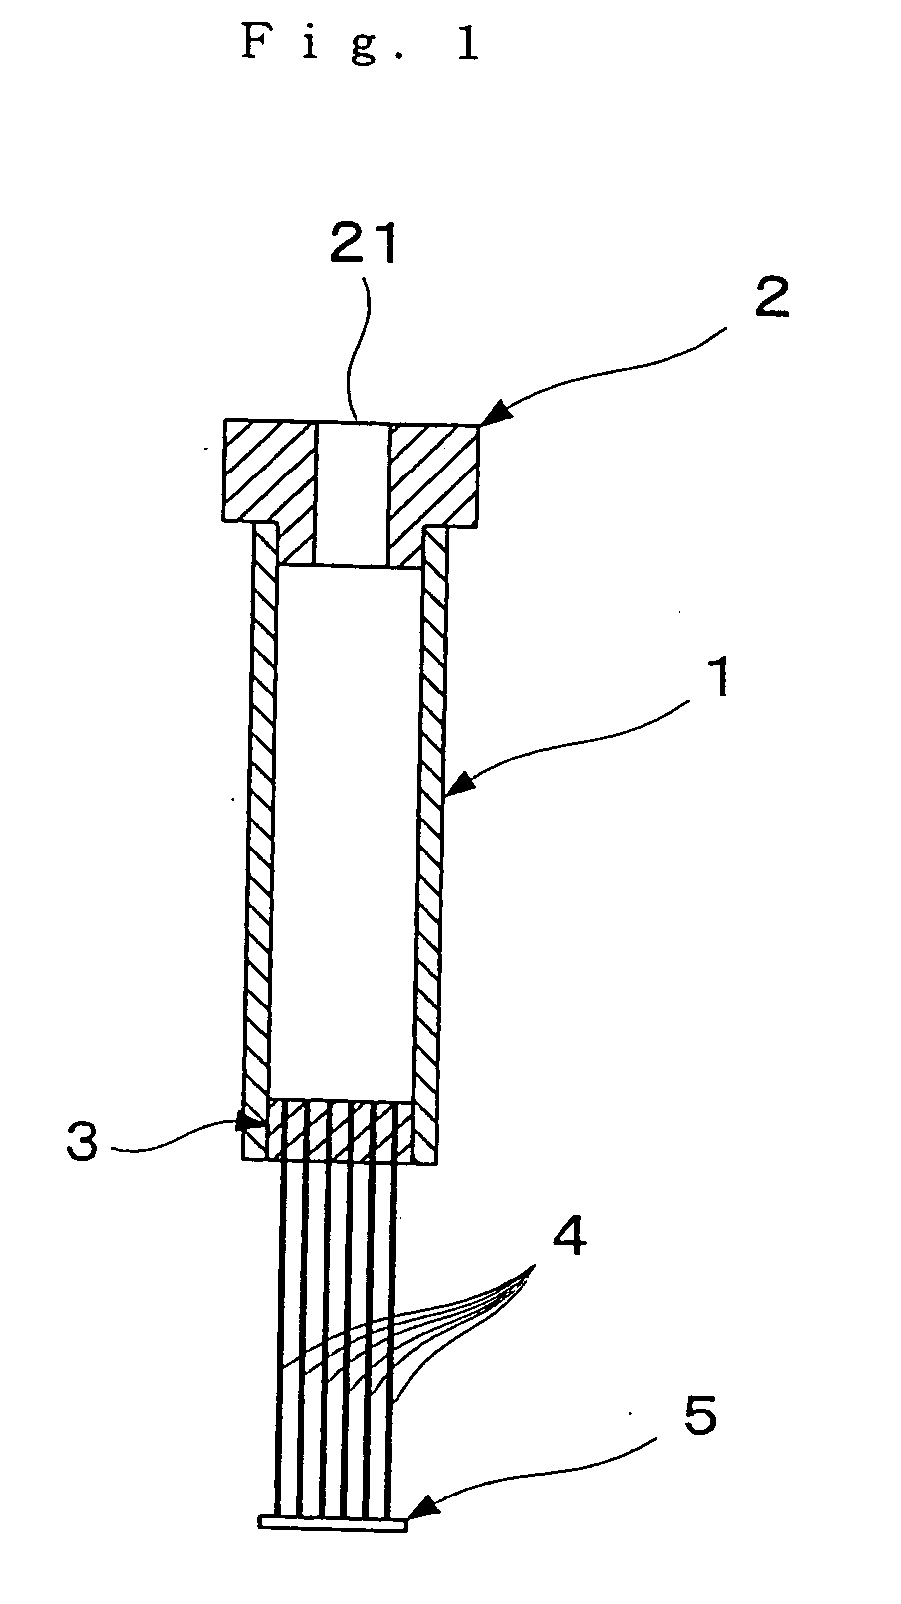 Methods of culturing, storing, and inducing differentiation in cells, instrument for use in the methods, method of using the instrument, and medical biomaterial